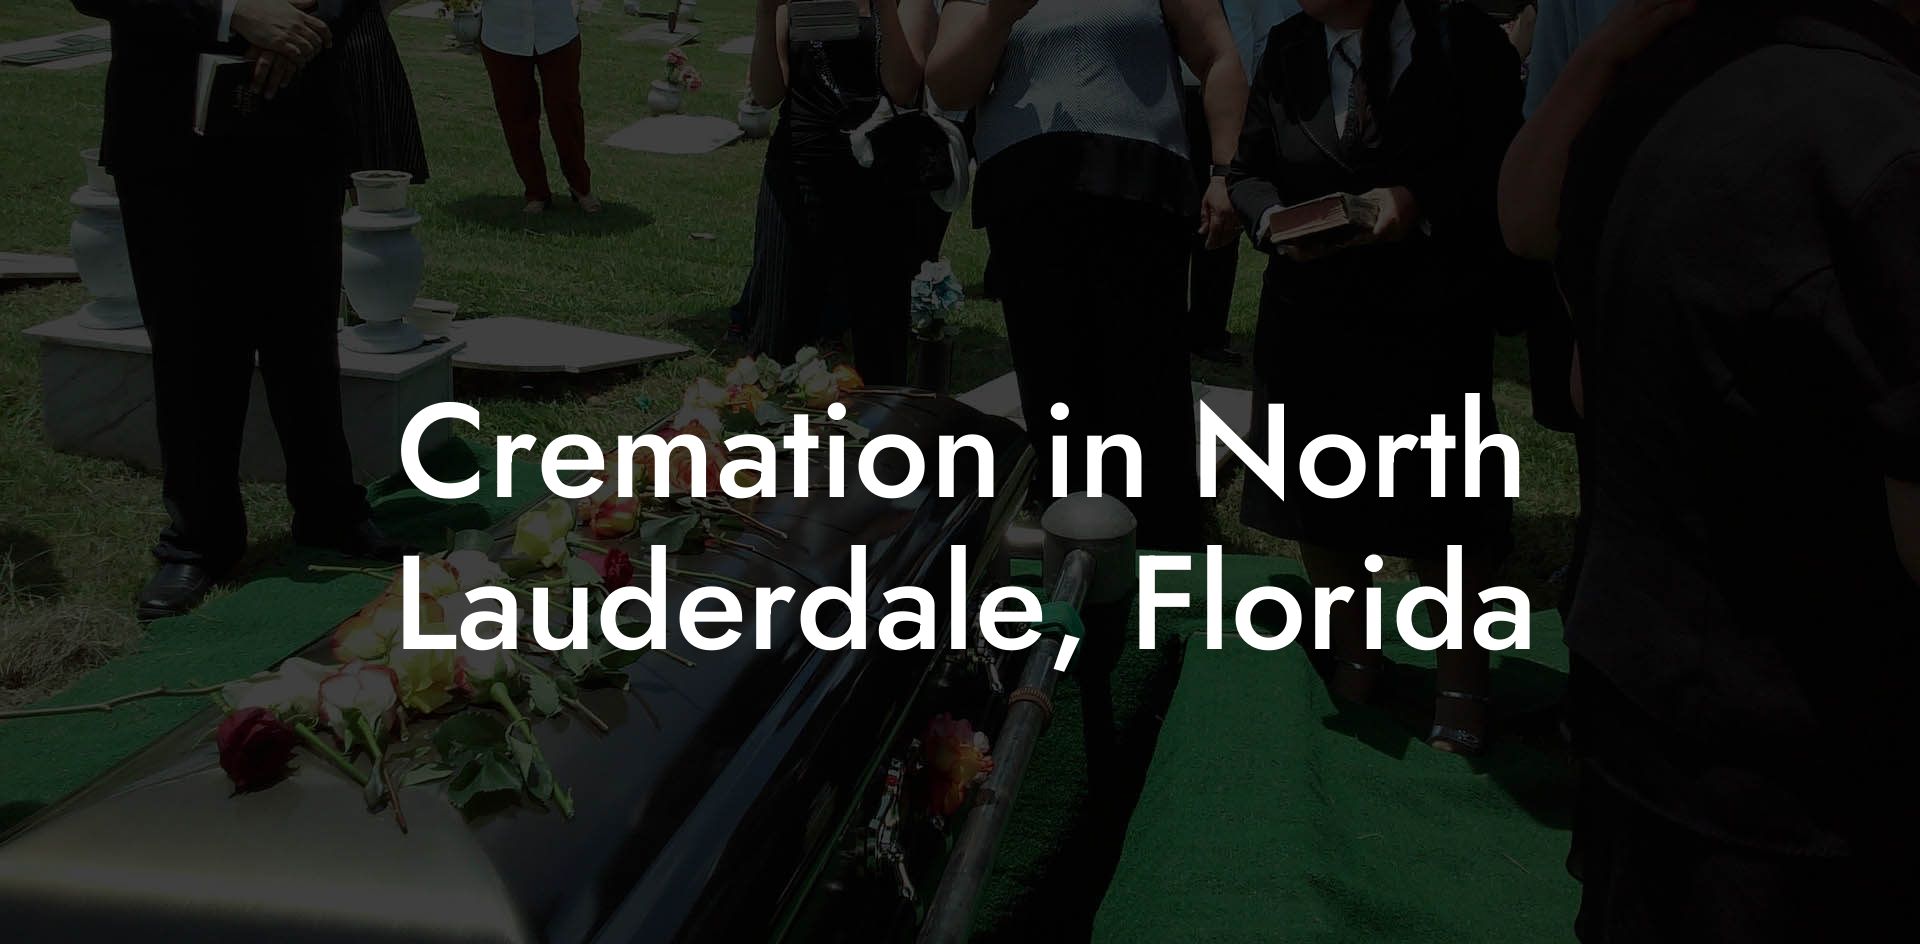 Cremation in North Lauderdale, Florida